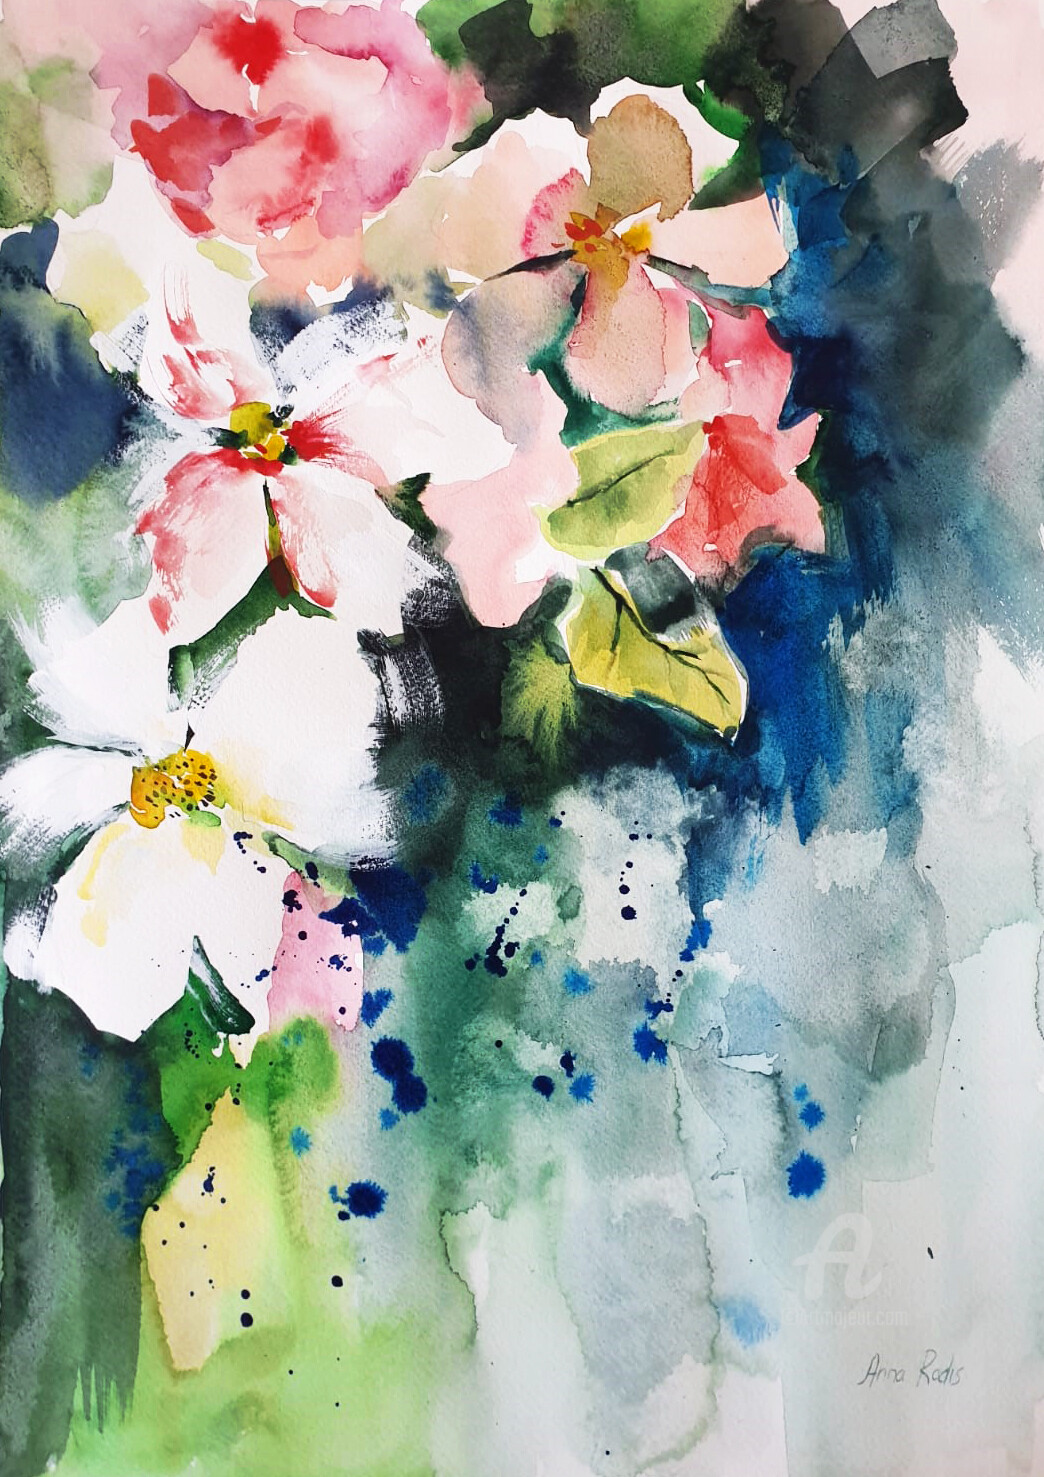 Living Room Abstract Art Original Watercolor Painting not a print Flowers Colorful